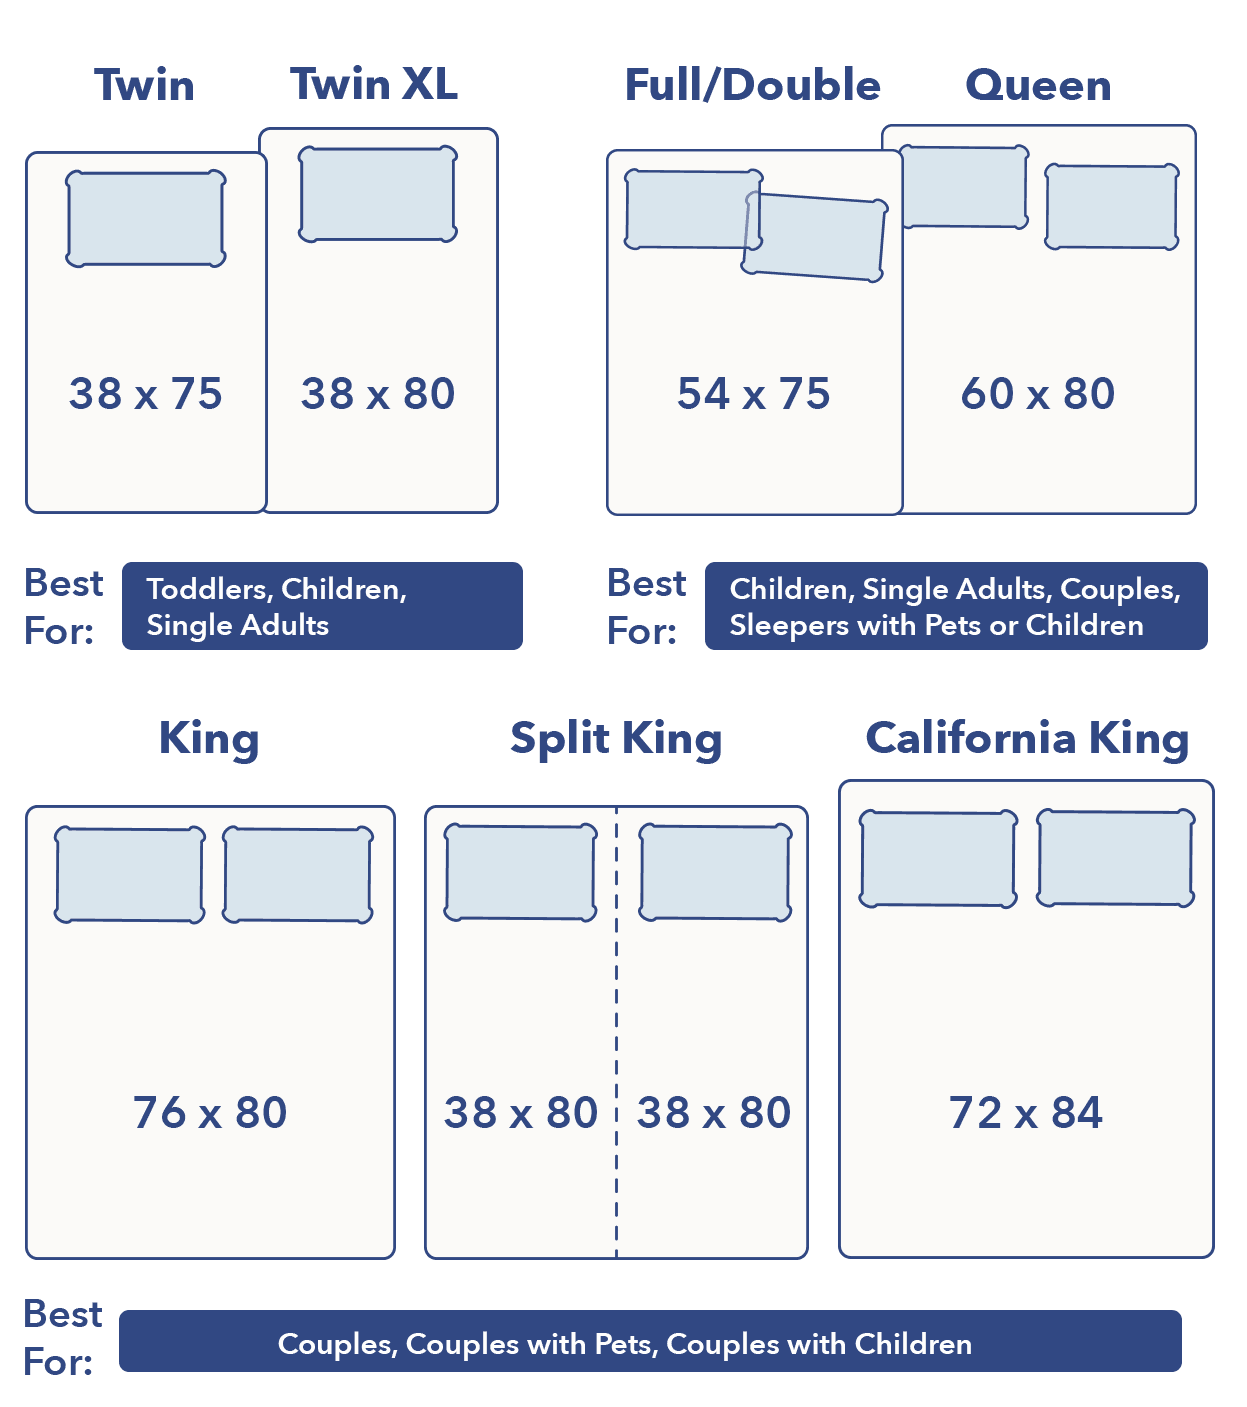 The basic information about full size bed dimensions